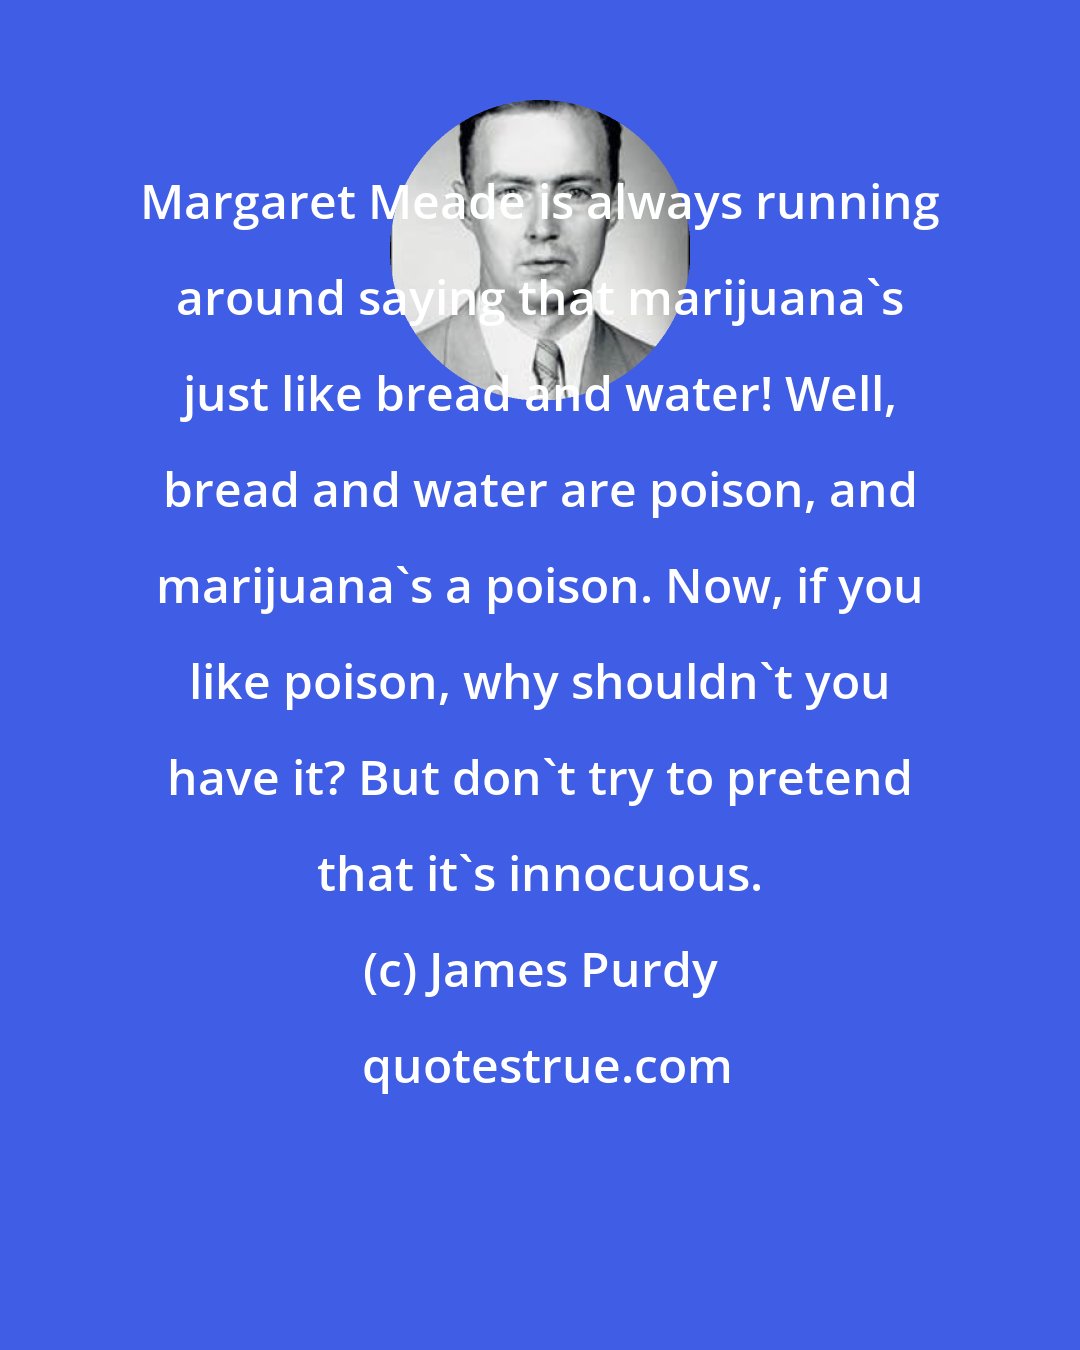 James Purdy: Margaret Meade is always running around saying that marijuana's just like bread and water! Well, bread and water are poison, and marijuana's a poison. Now, if you like poison, why shouldn't you have it? But don't try to pretend that it's innocuous.